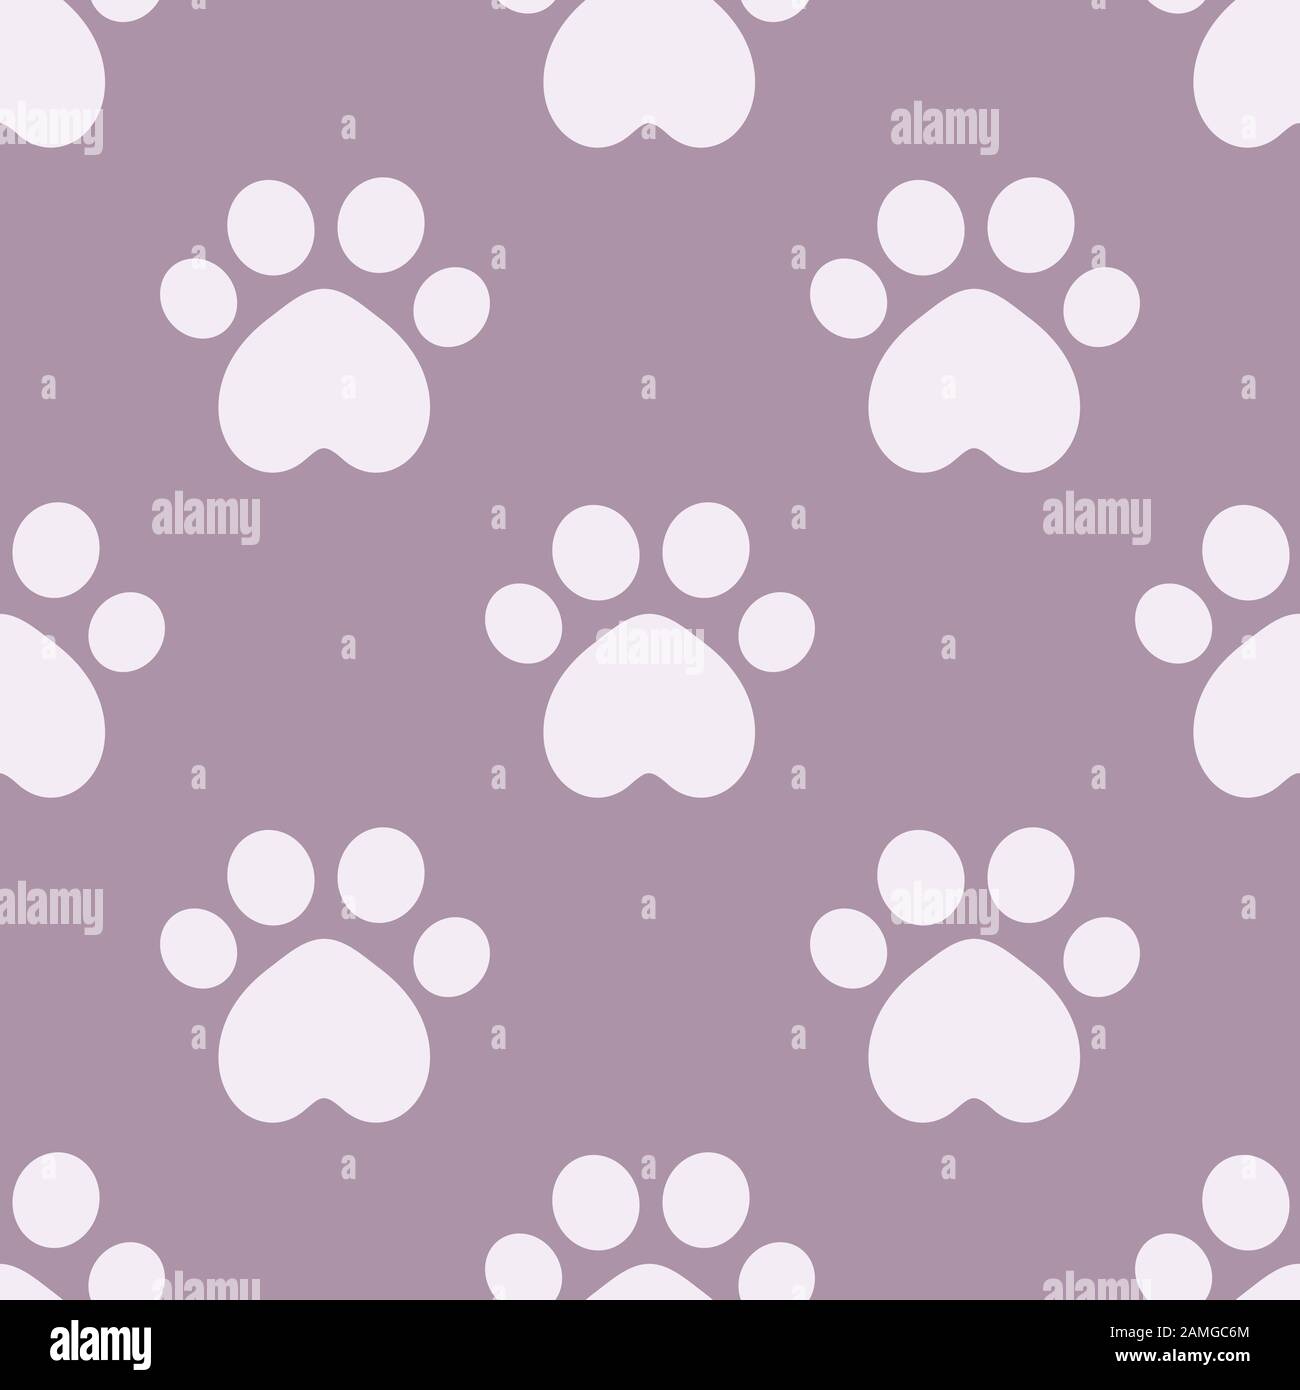 222100 Cat Paw Stock Photos Pictures  RoyaltyFree Images  iStock   Dog paw Paw print Dog